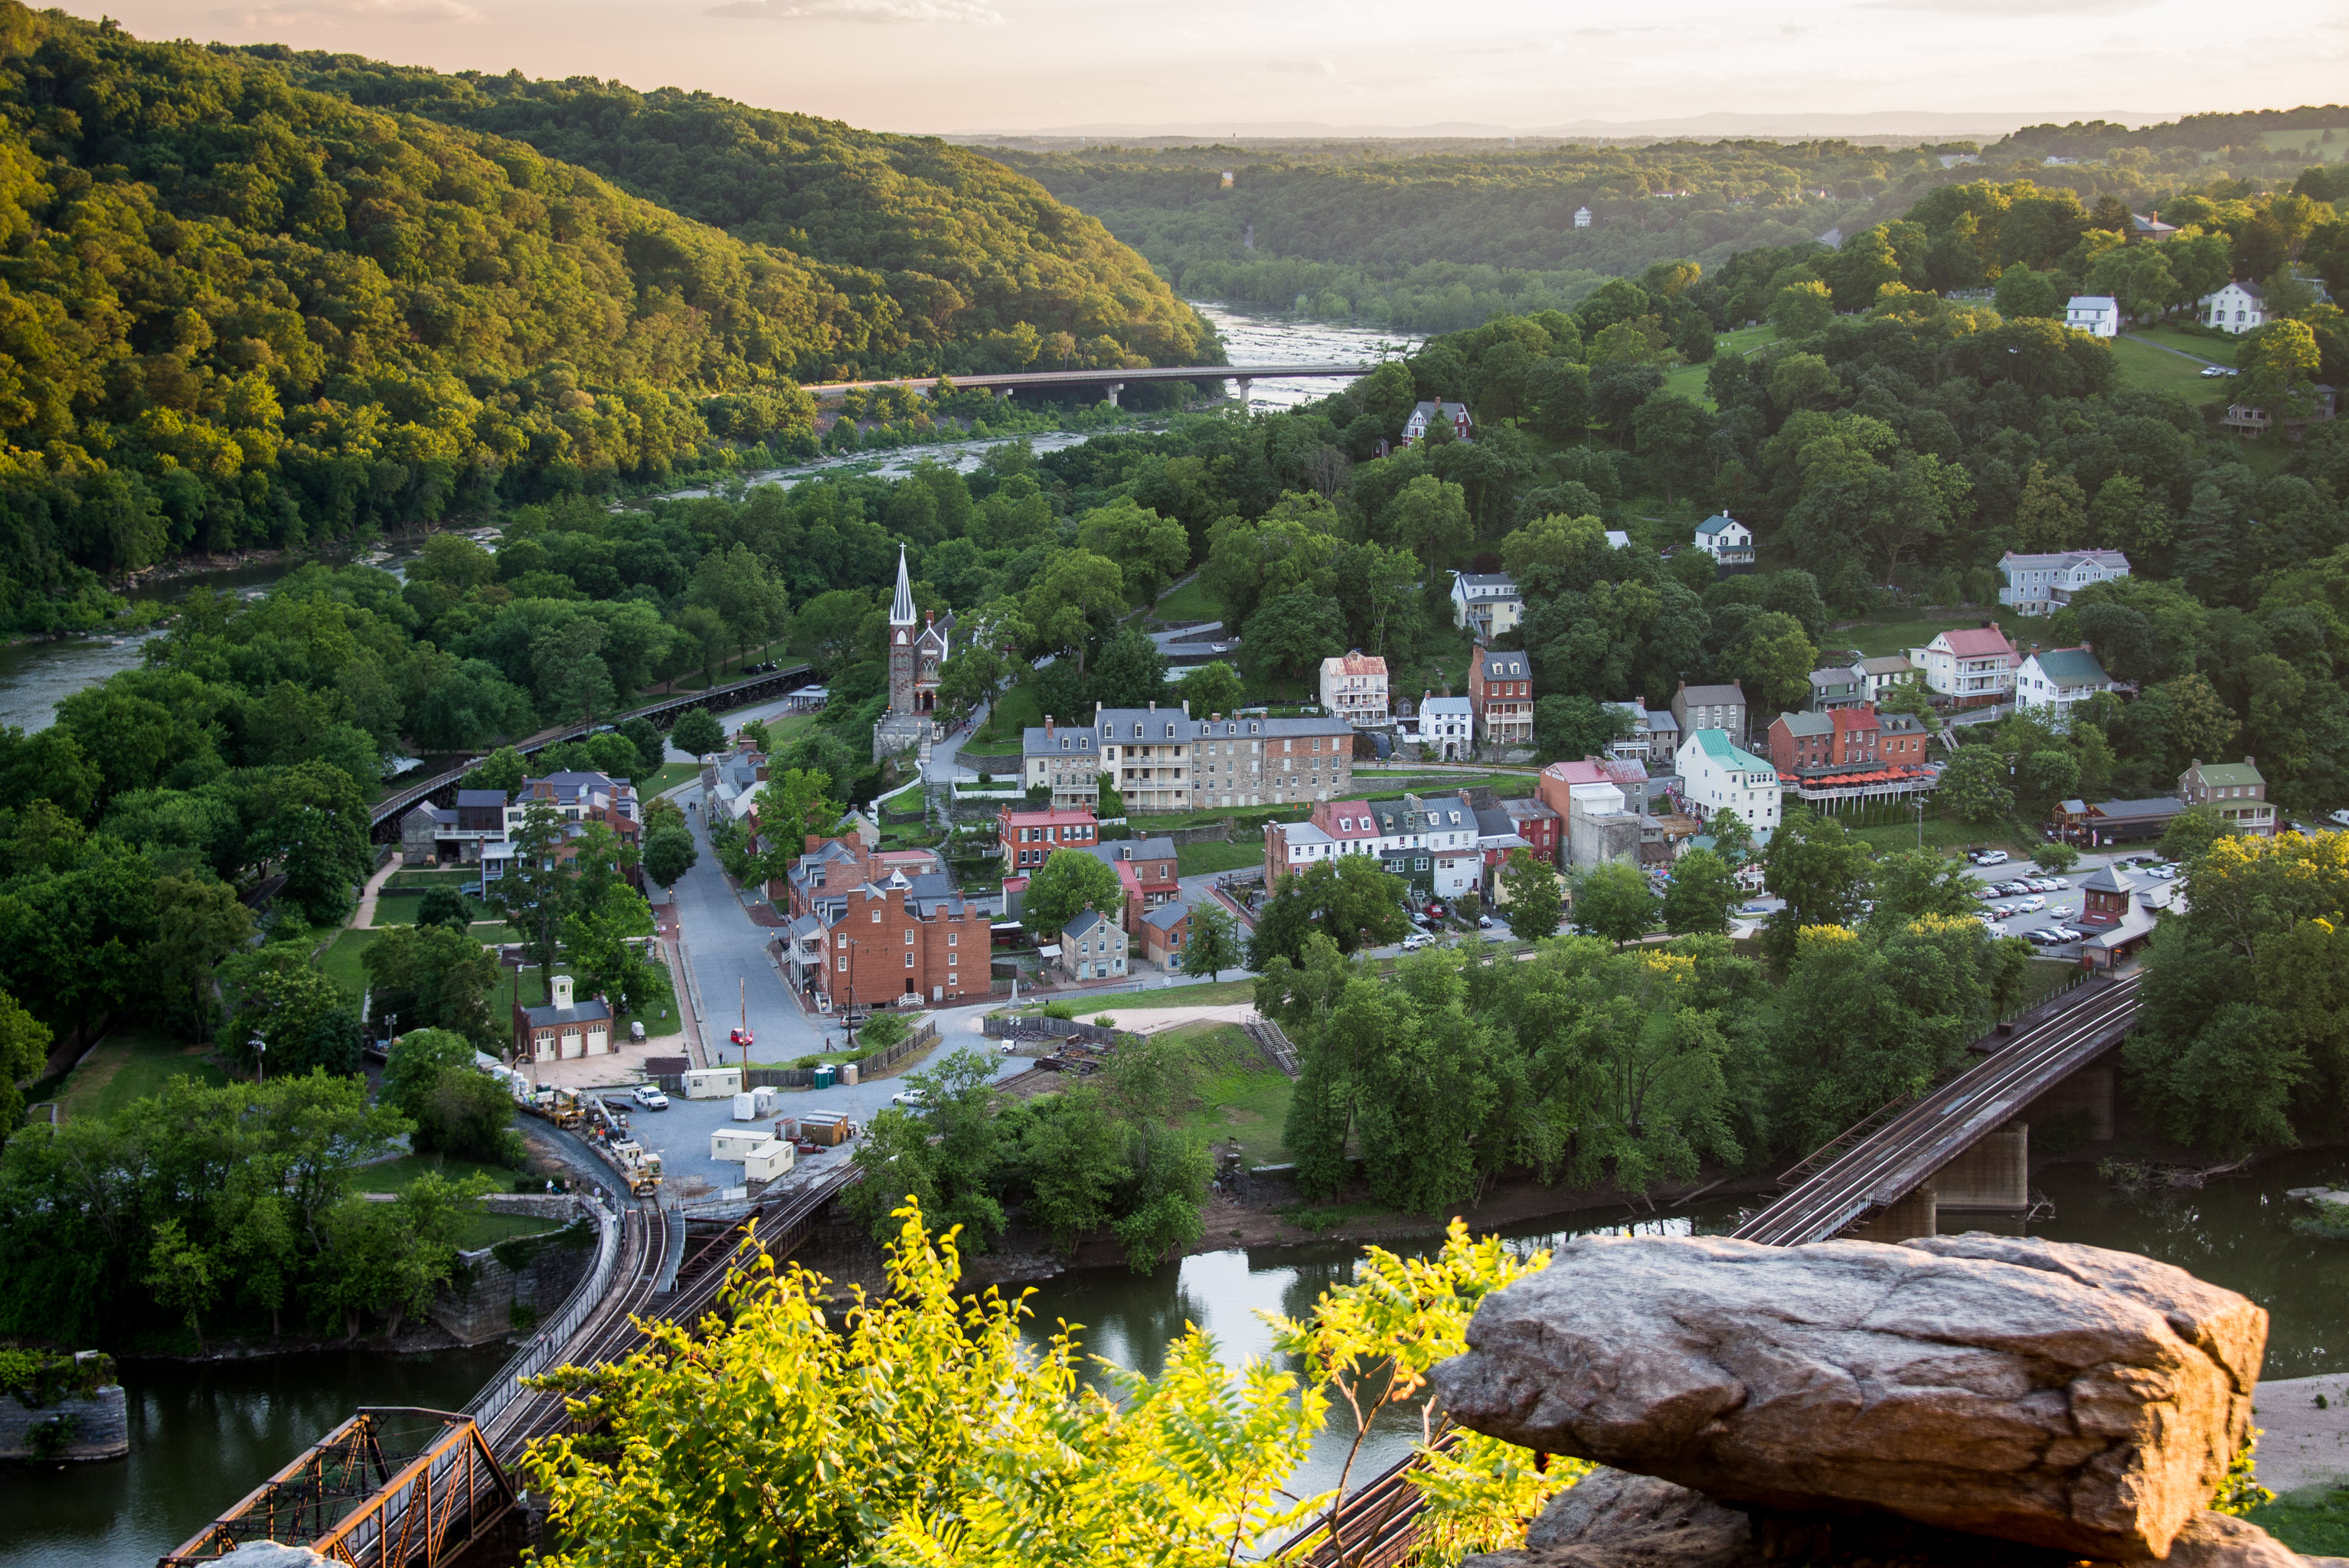 View of Lower Town Harpers Ferry as seen from Maryland Heights